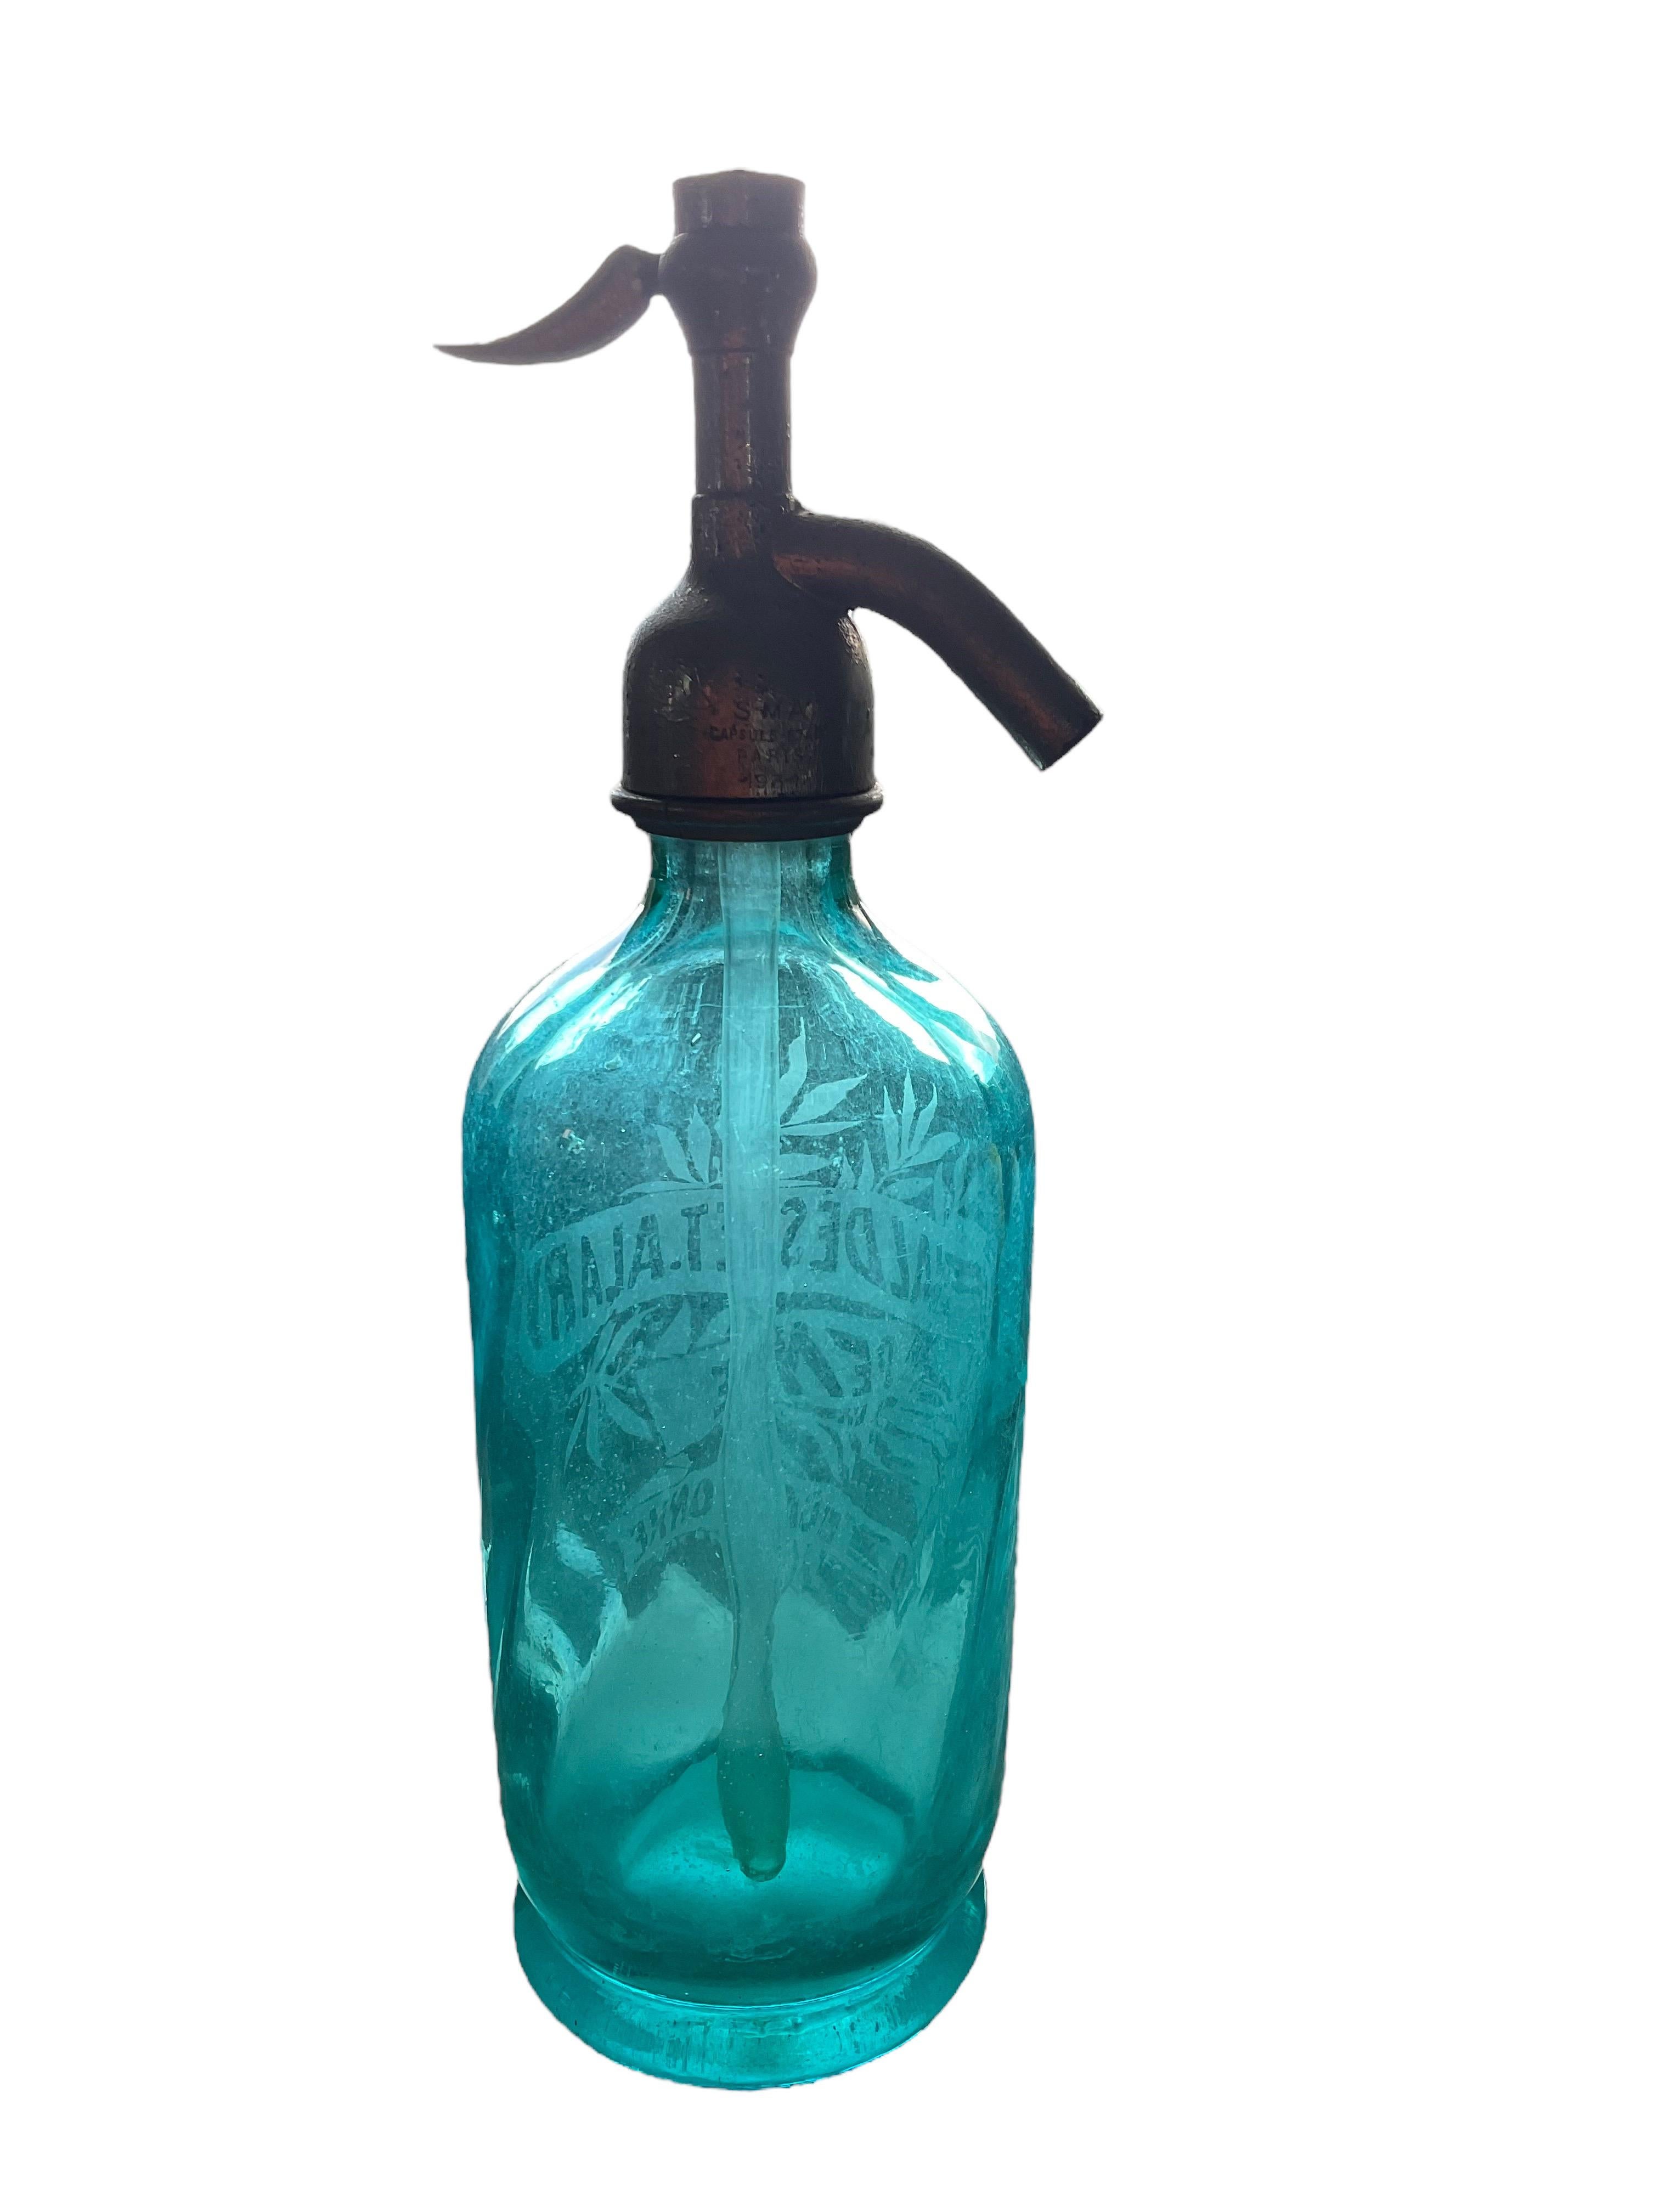 This Antique French Aqua Blue J. Fialdes and ET Alary Soda Bottle measures 10 1/2